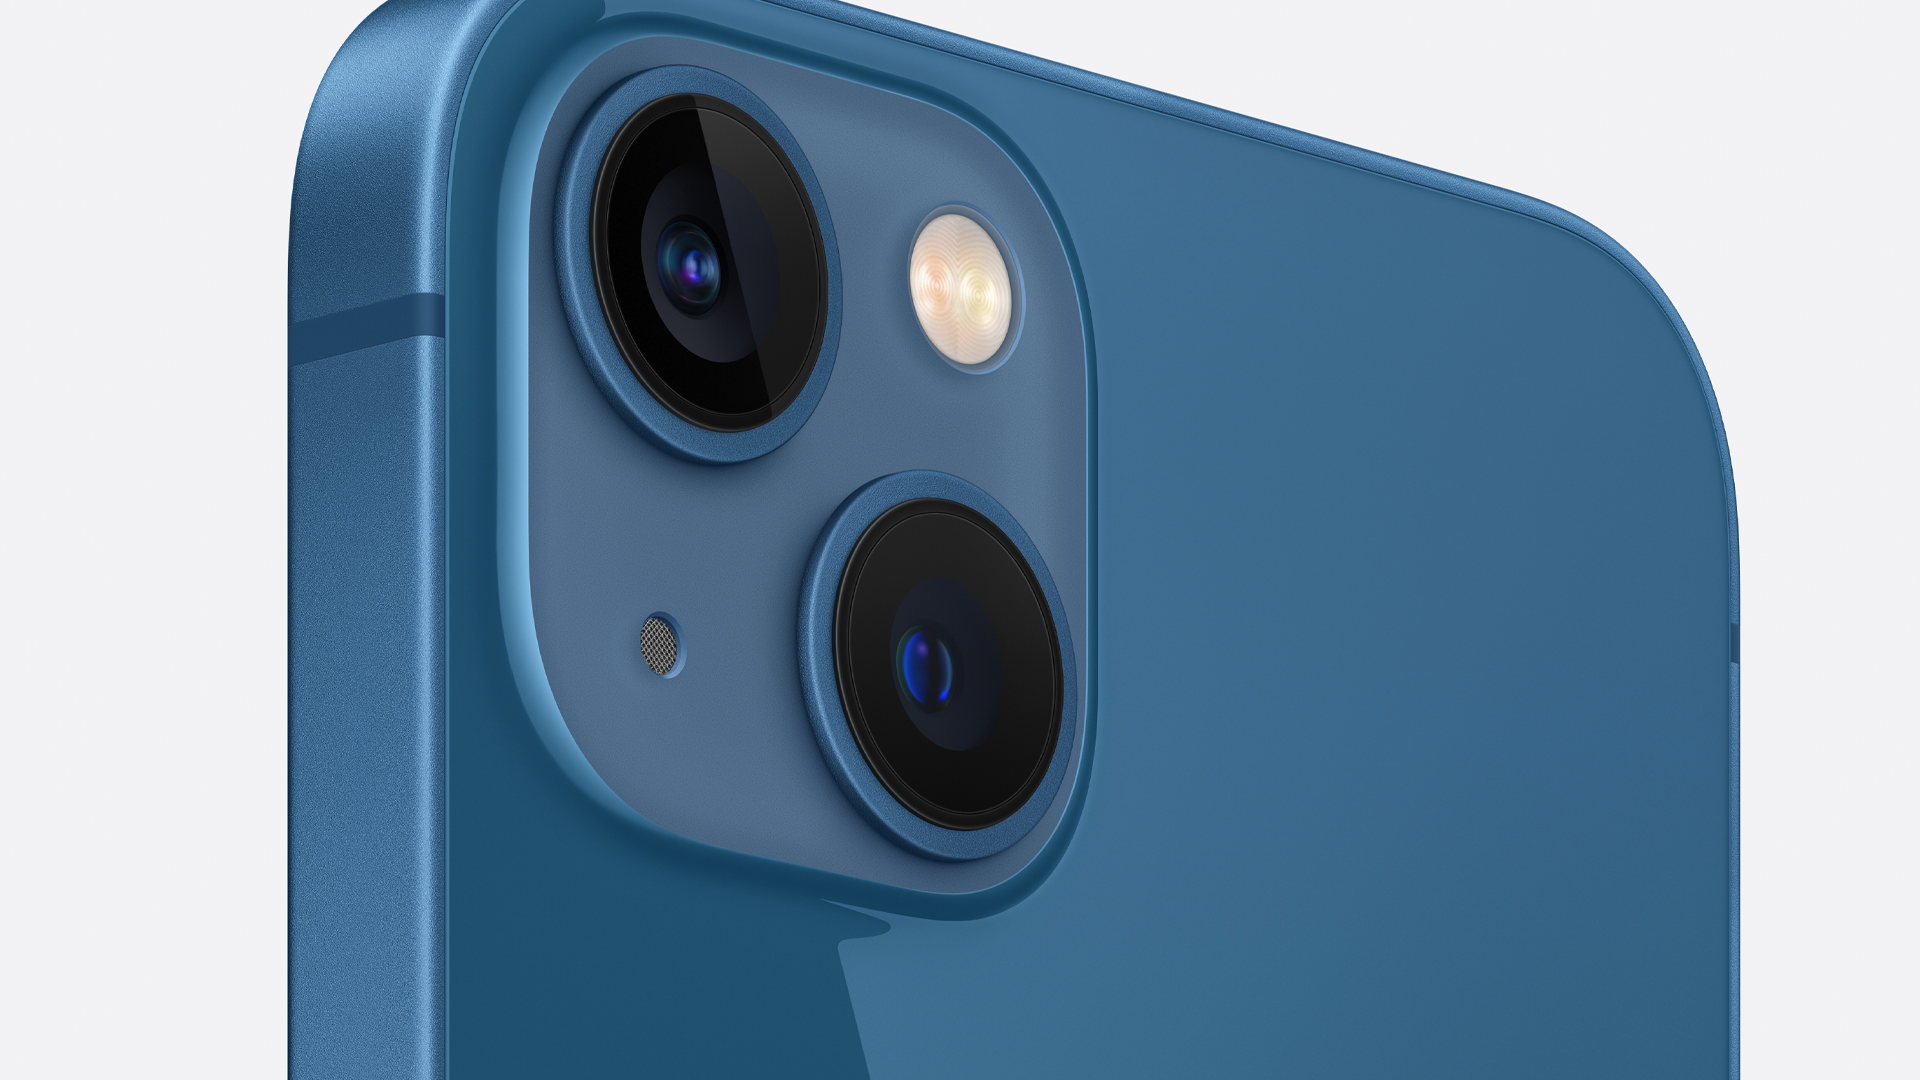 The iPhone 13's dual rear cameras.